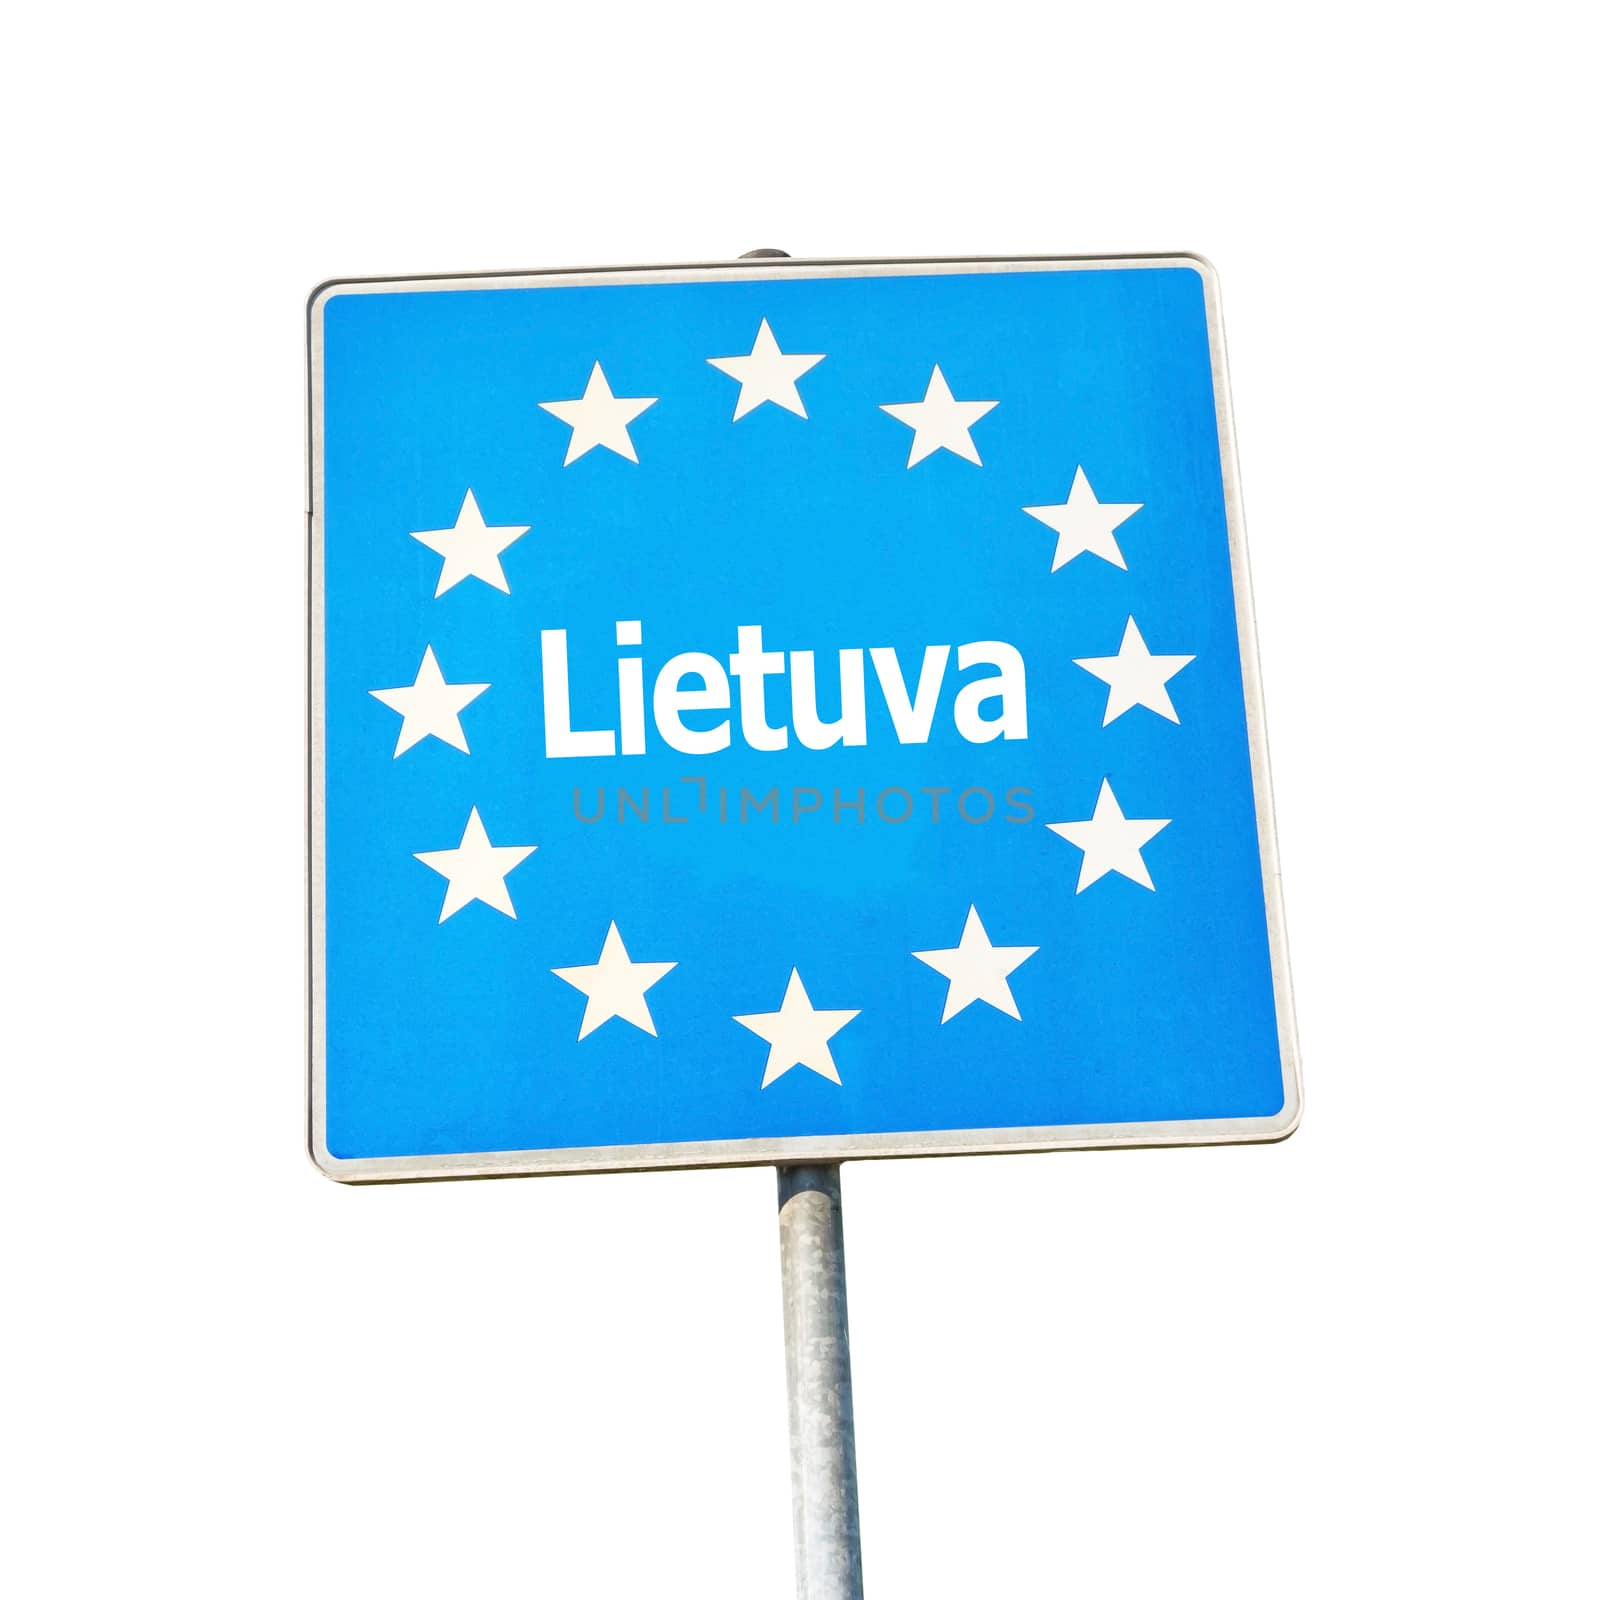 Border sign of lithuania, europe - isolated on white background